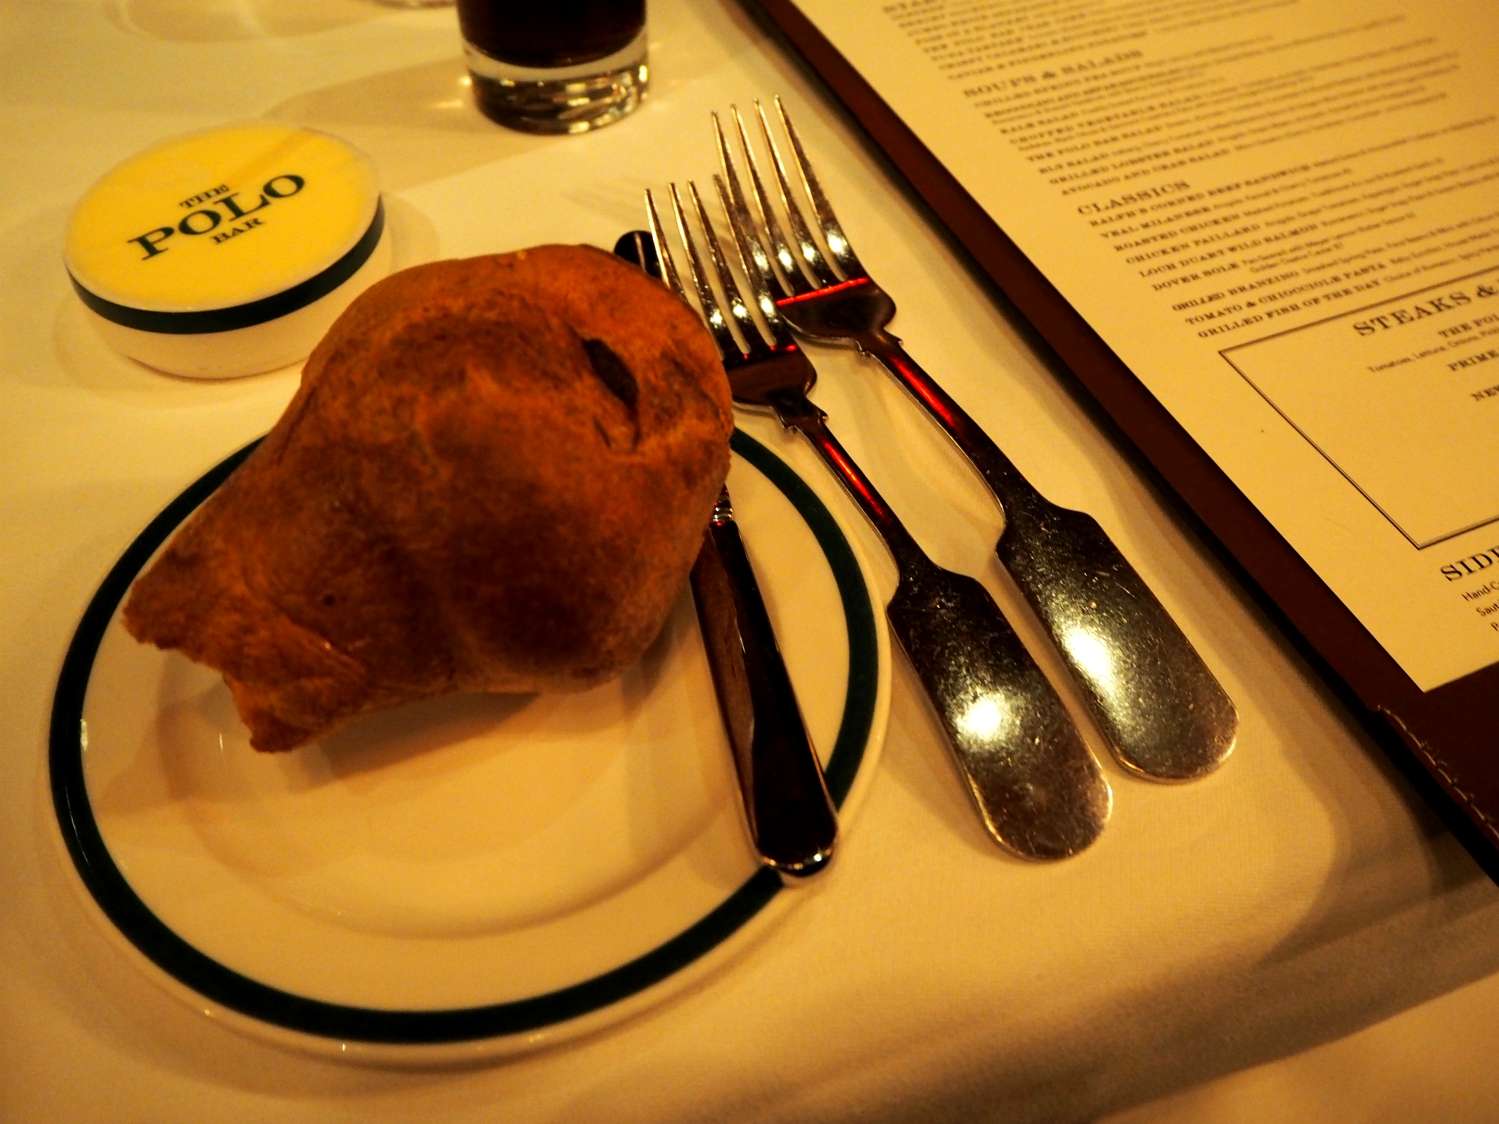 The Polo Bar bread and butter